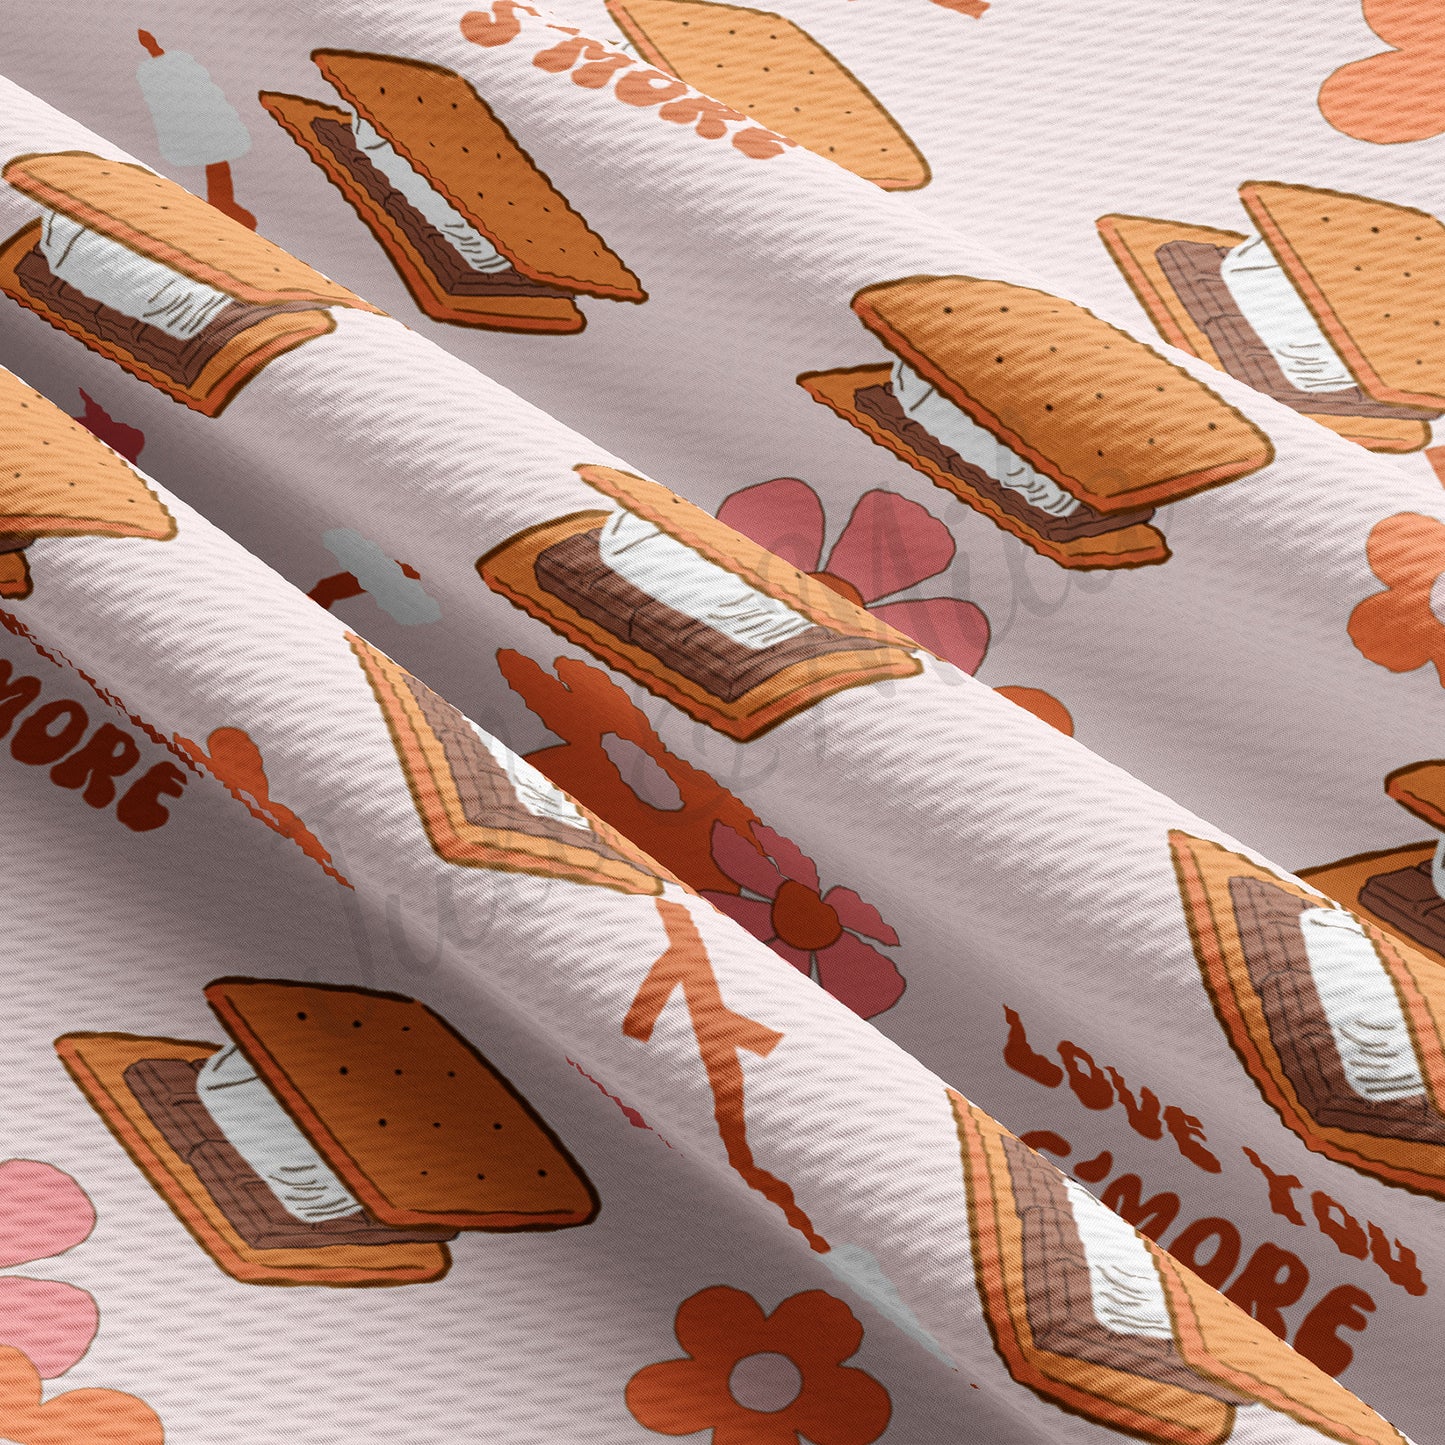 Love you SMore Valentines Day Fabric  AA1195